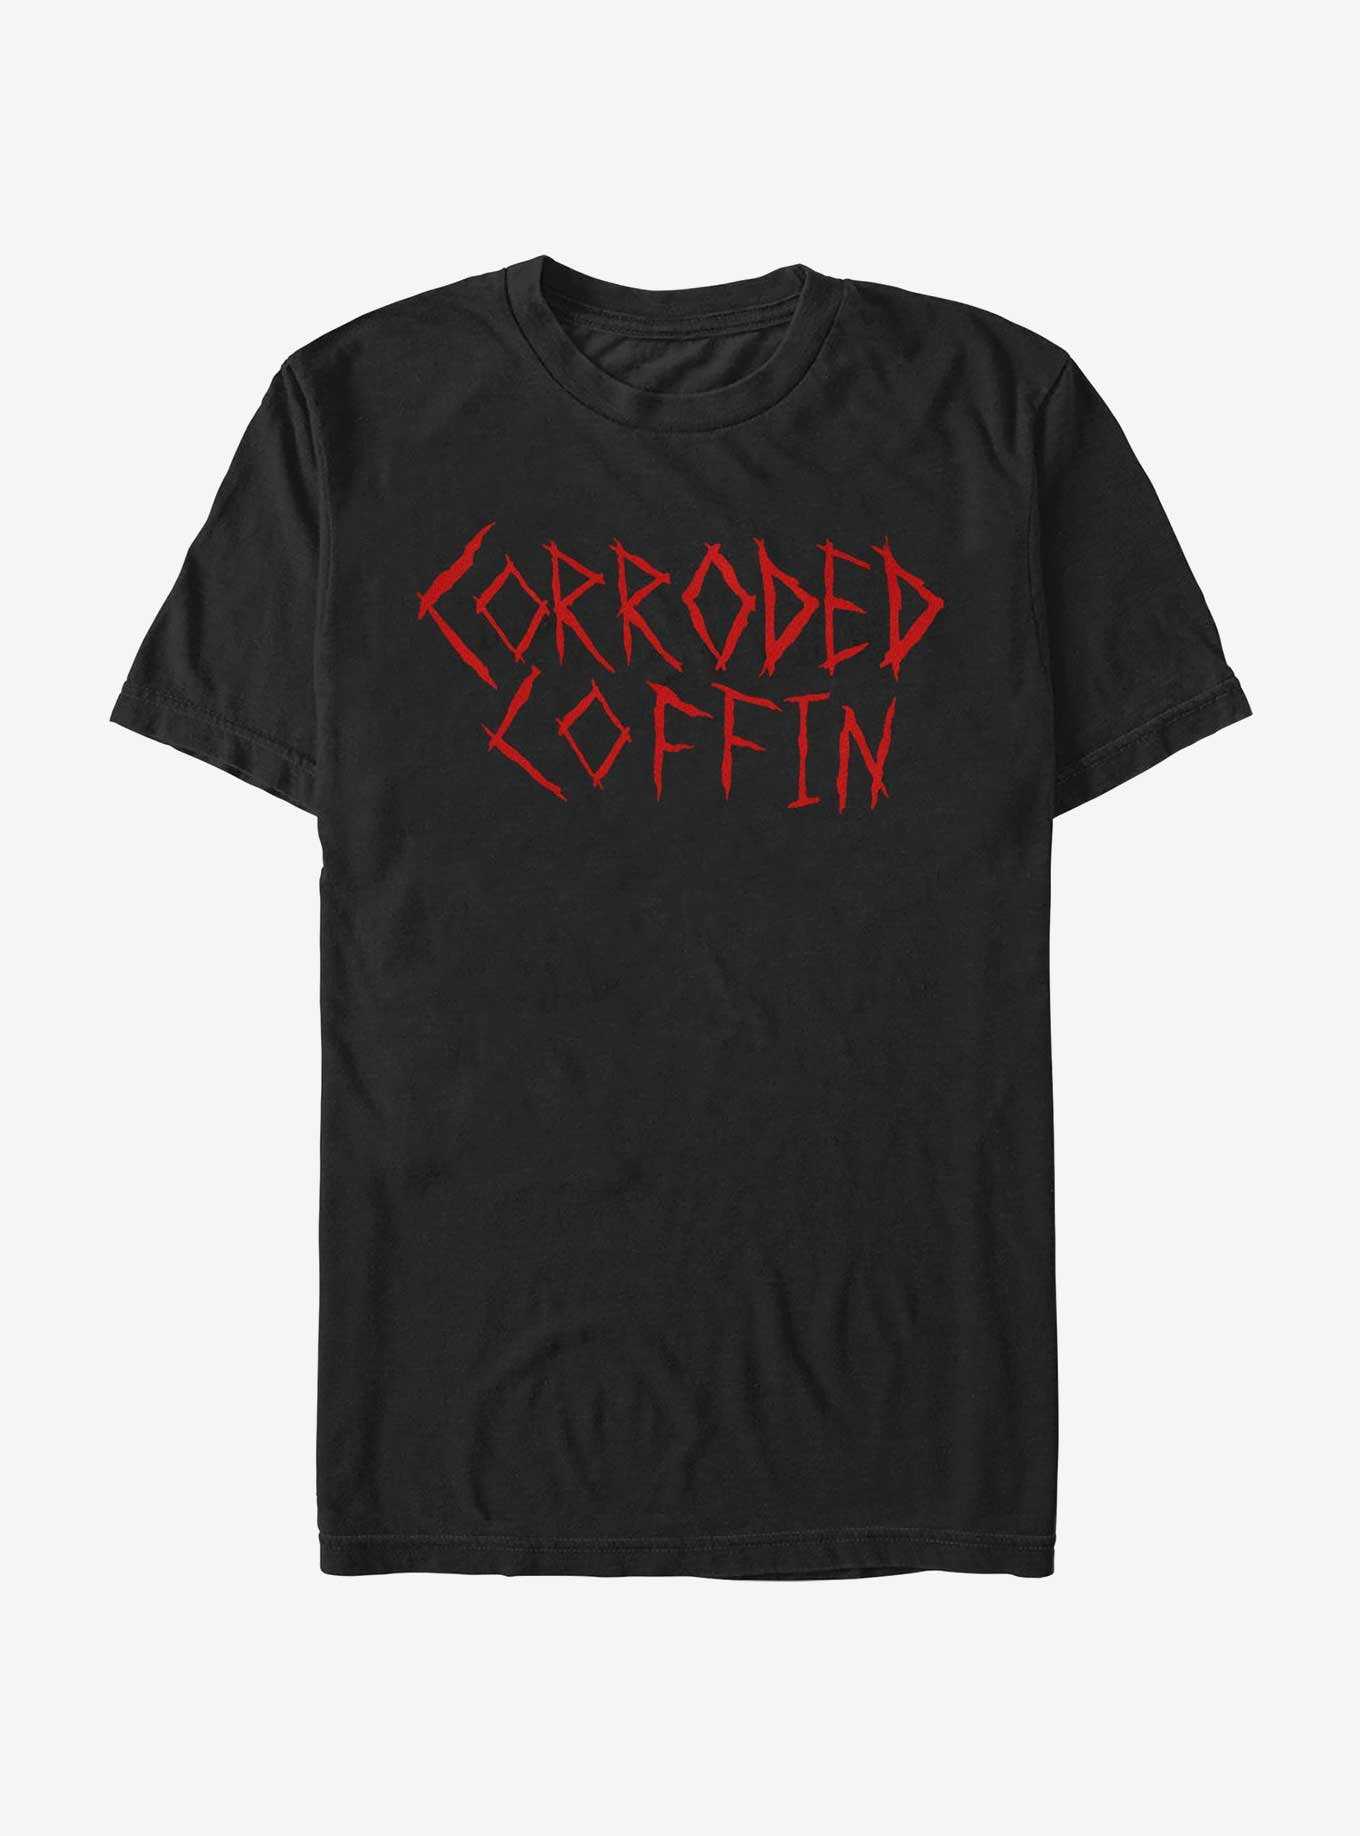 Stranger Things Corroded Coffin T-Shirt, , hi-res